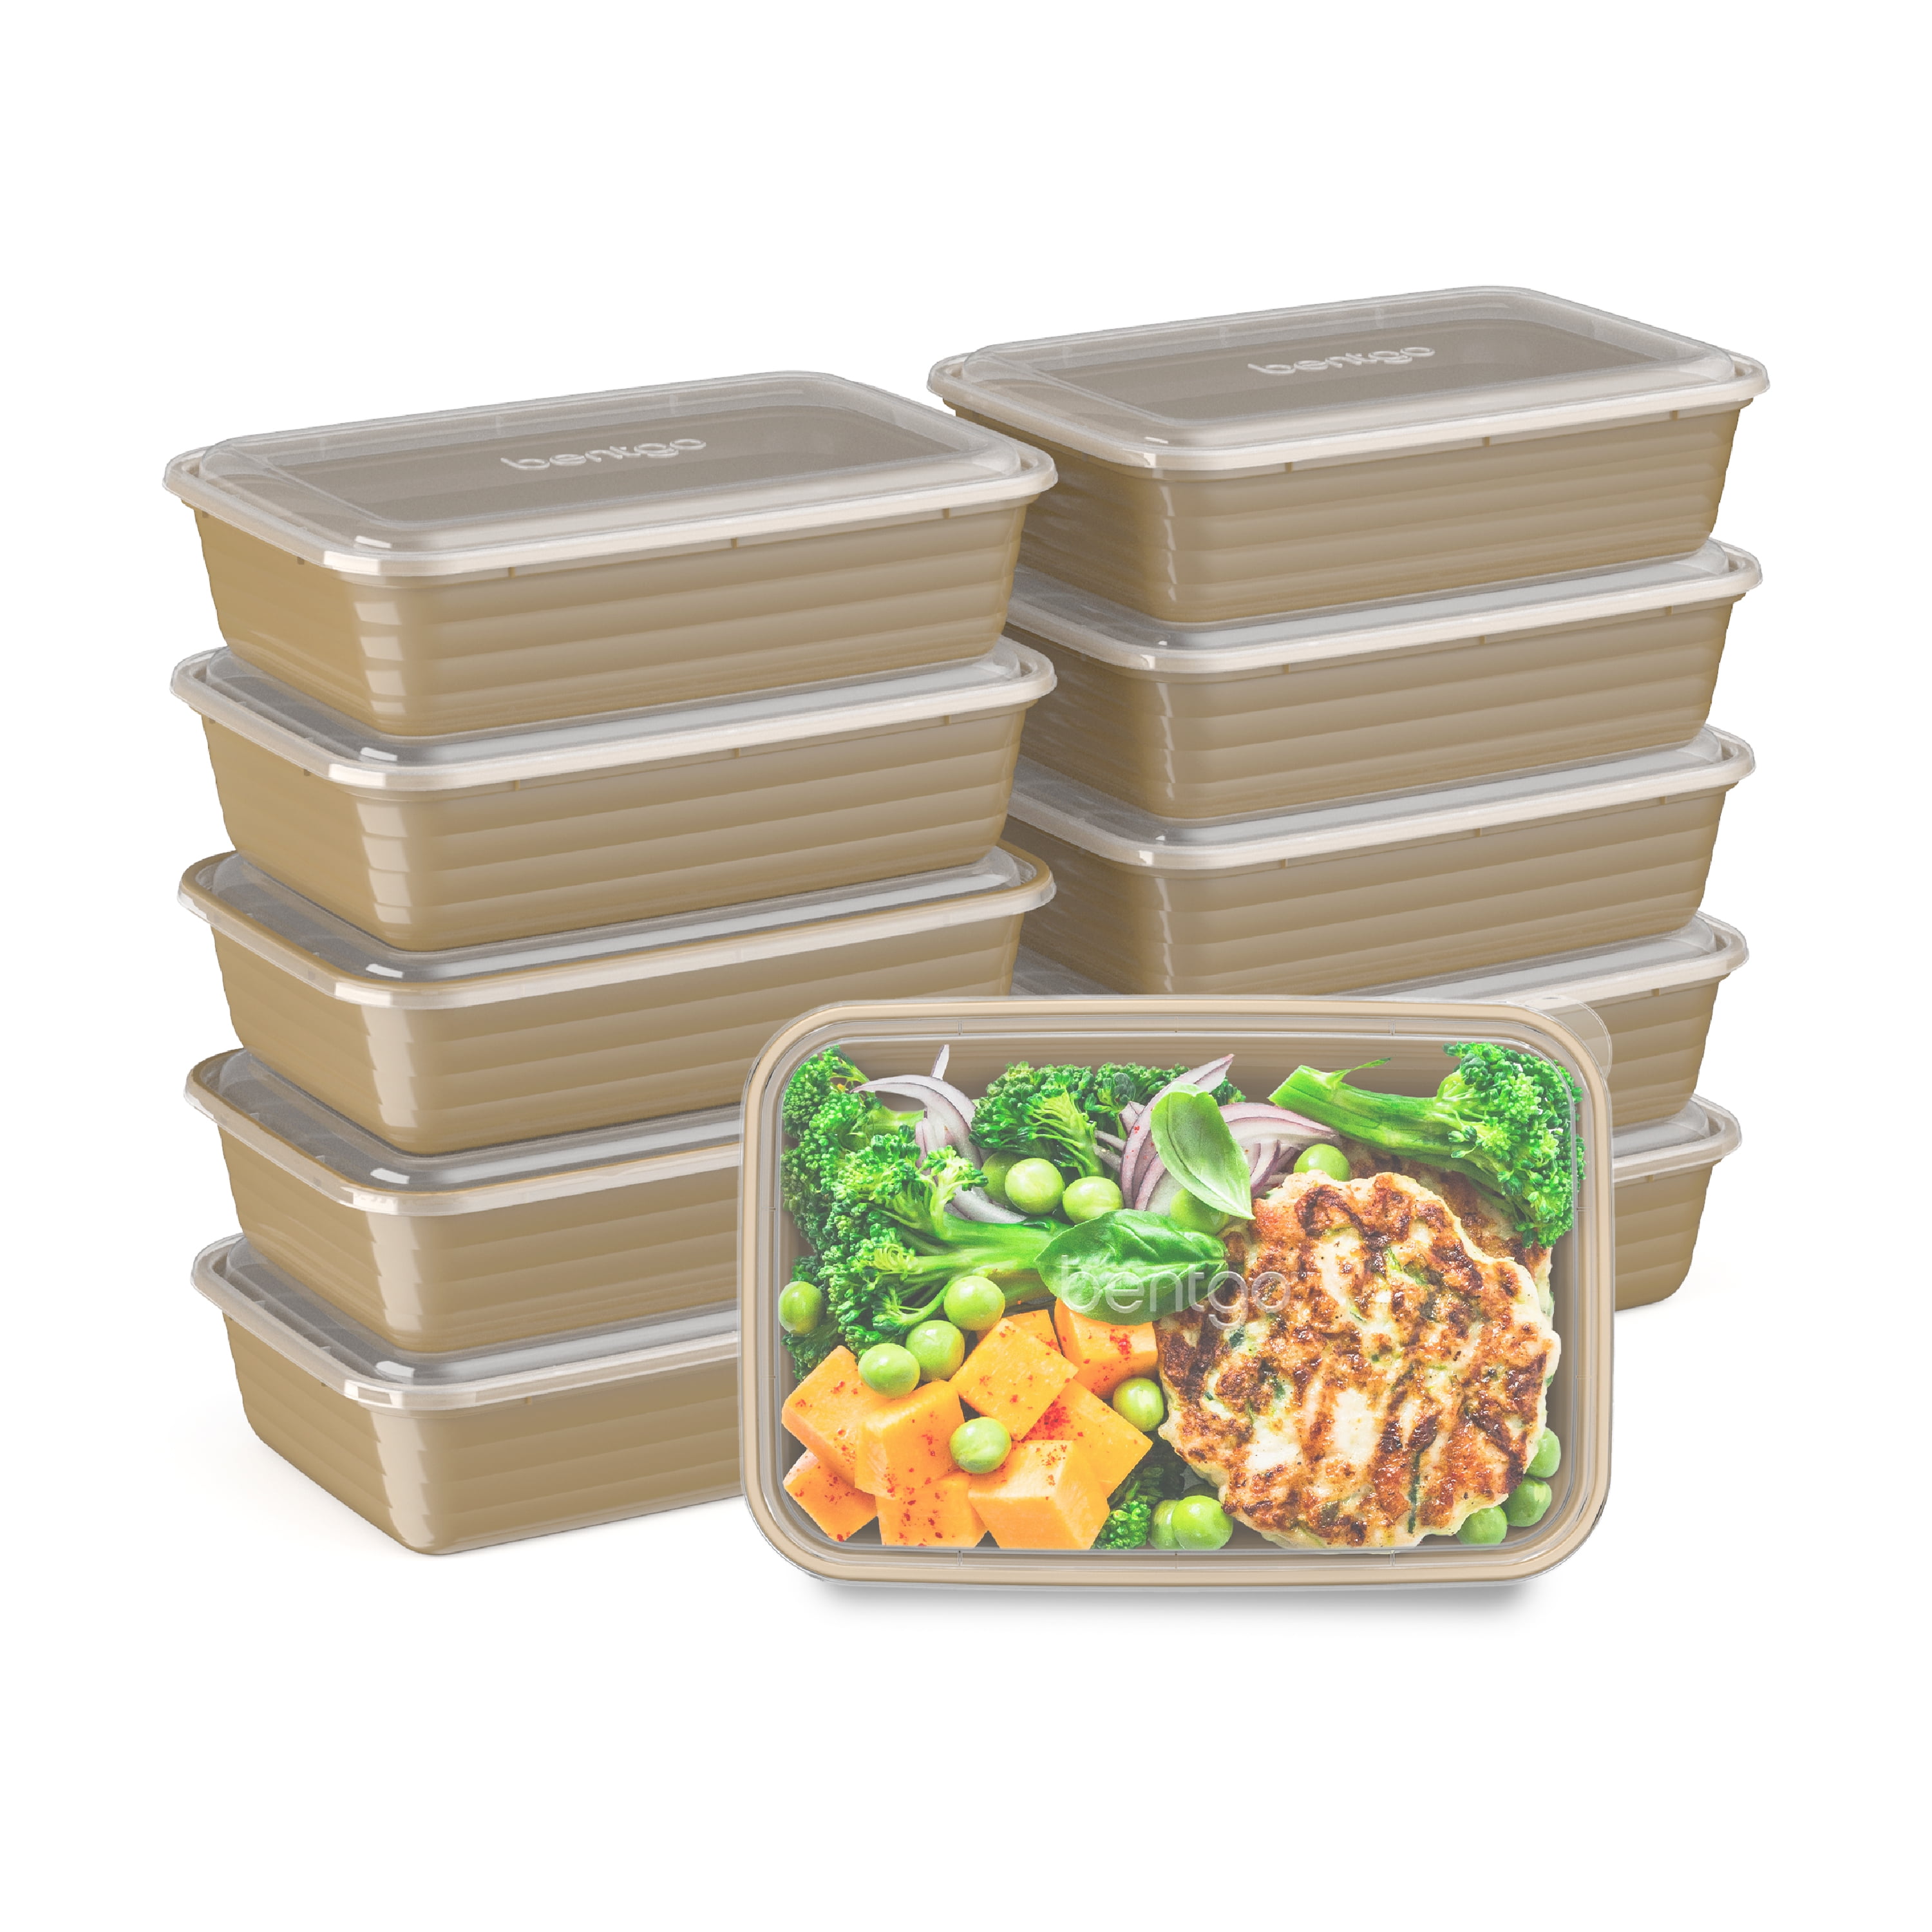 Bentgo® Prep 1-Compartment Food Storage Containers - Pink, 20 pc - Baker's